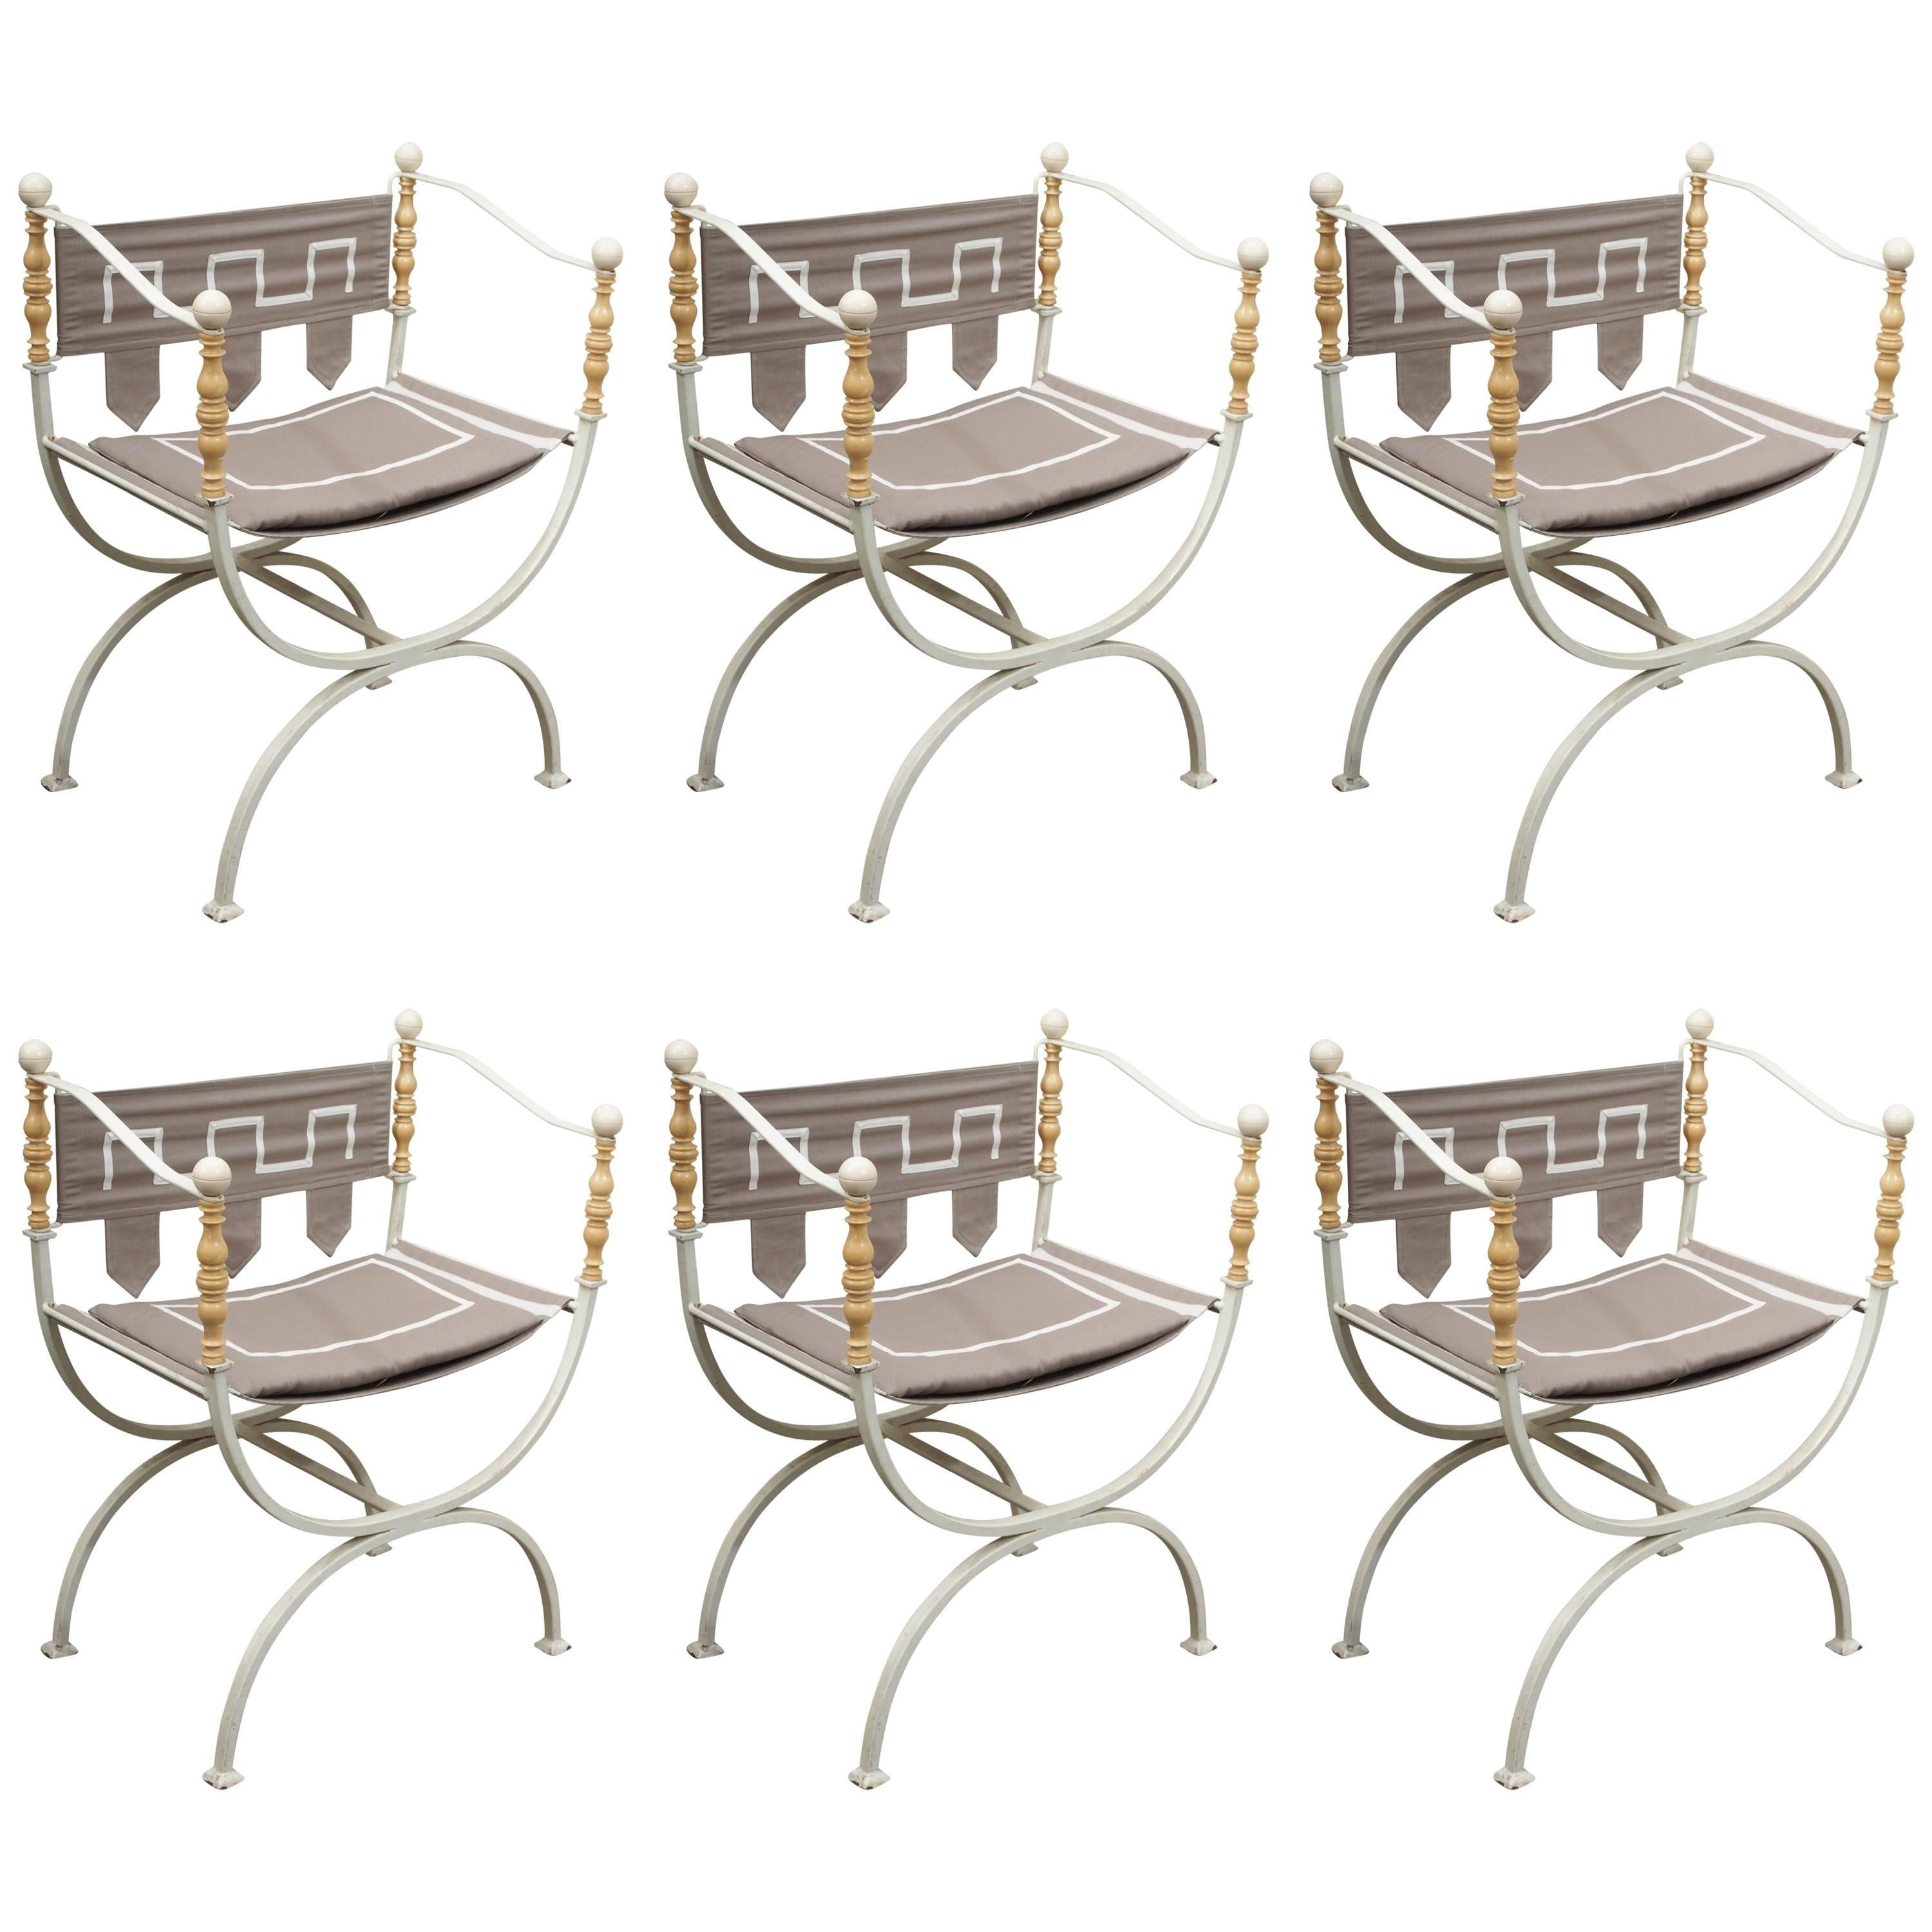 Set of Classic Garden Chairs